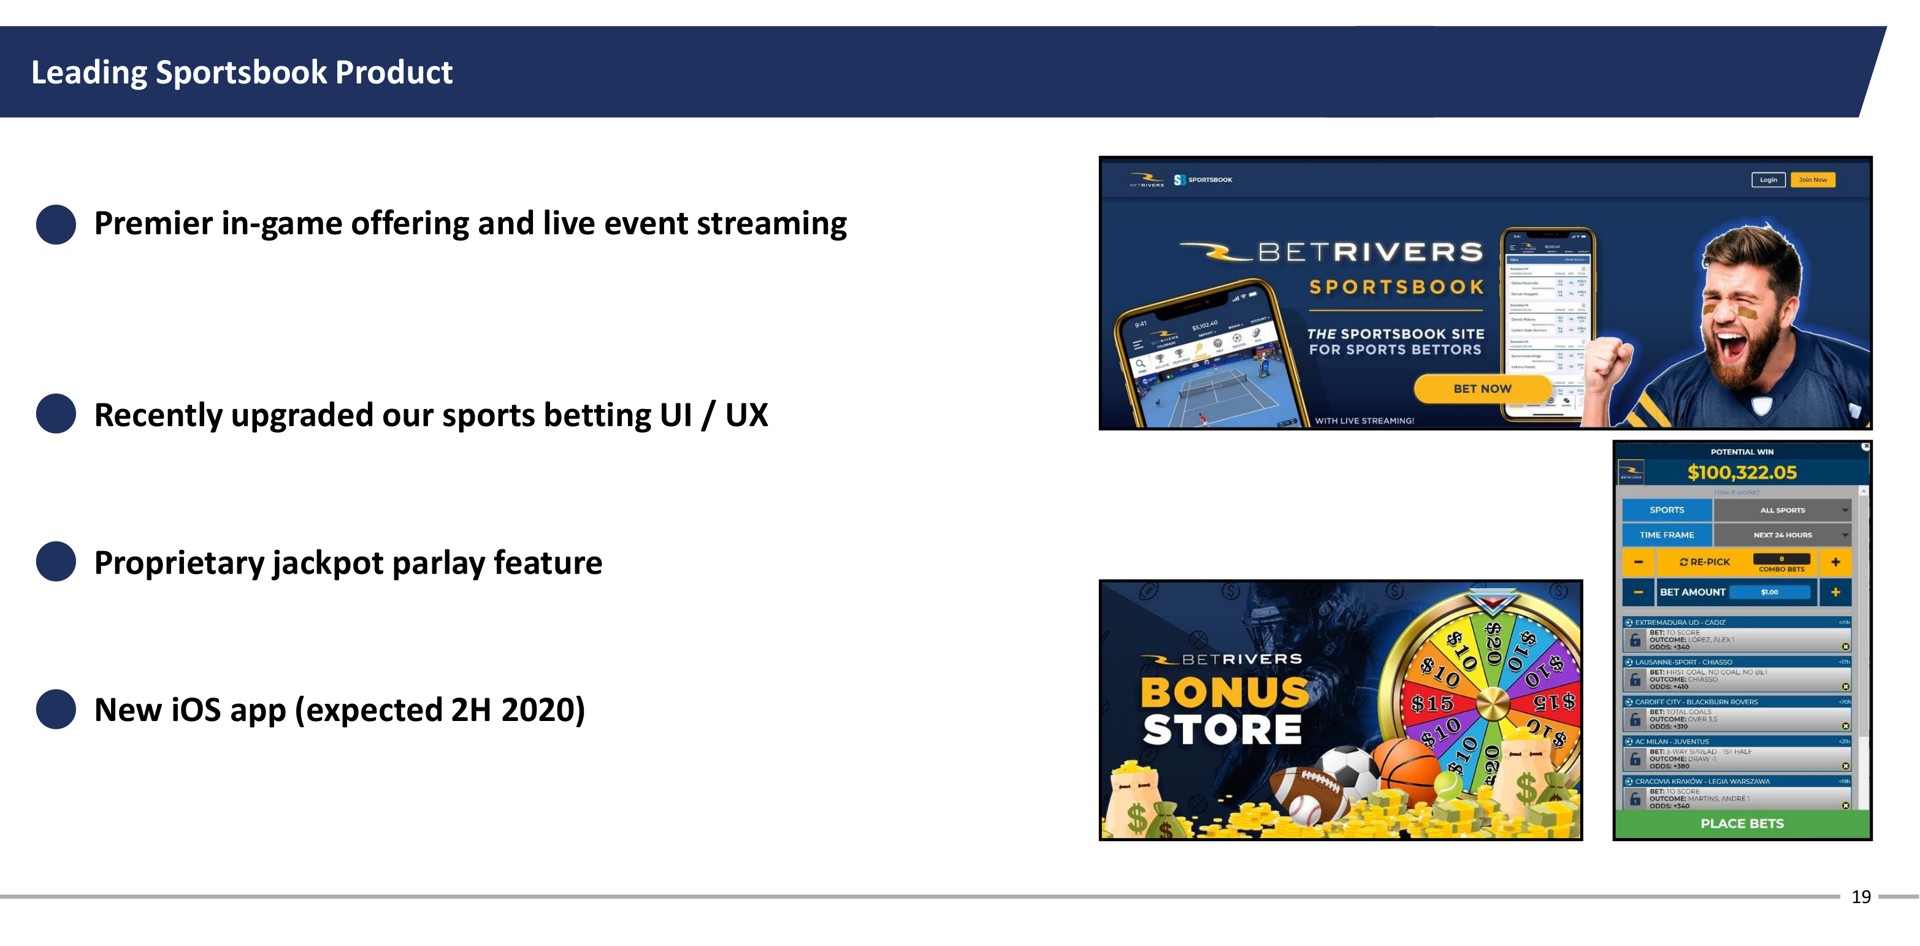 leading product premier in game offering and live event streaming recently upgraded our sports betting proprietary parlay feature new ios expected | Rush Street